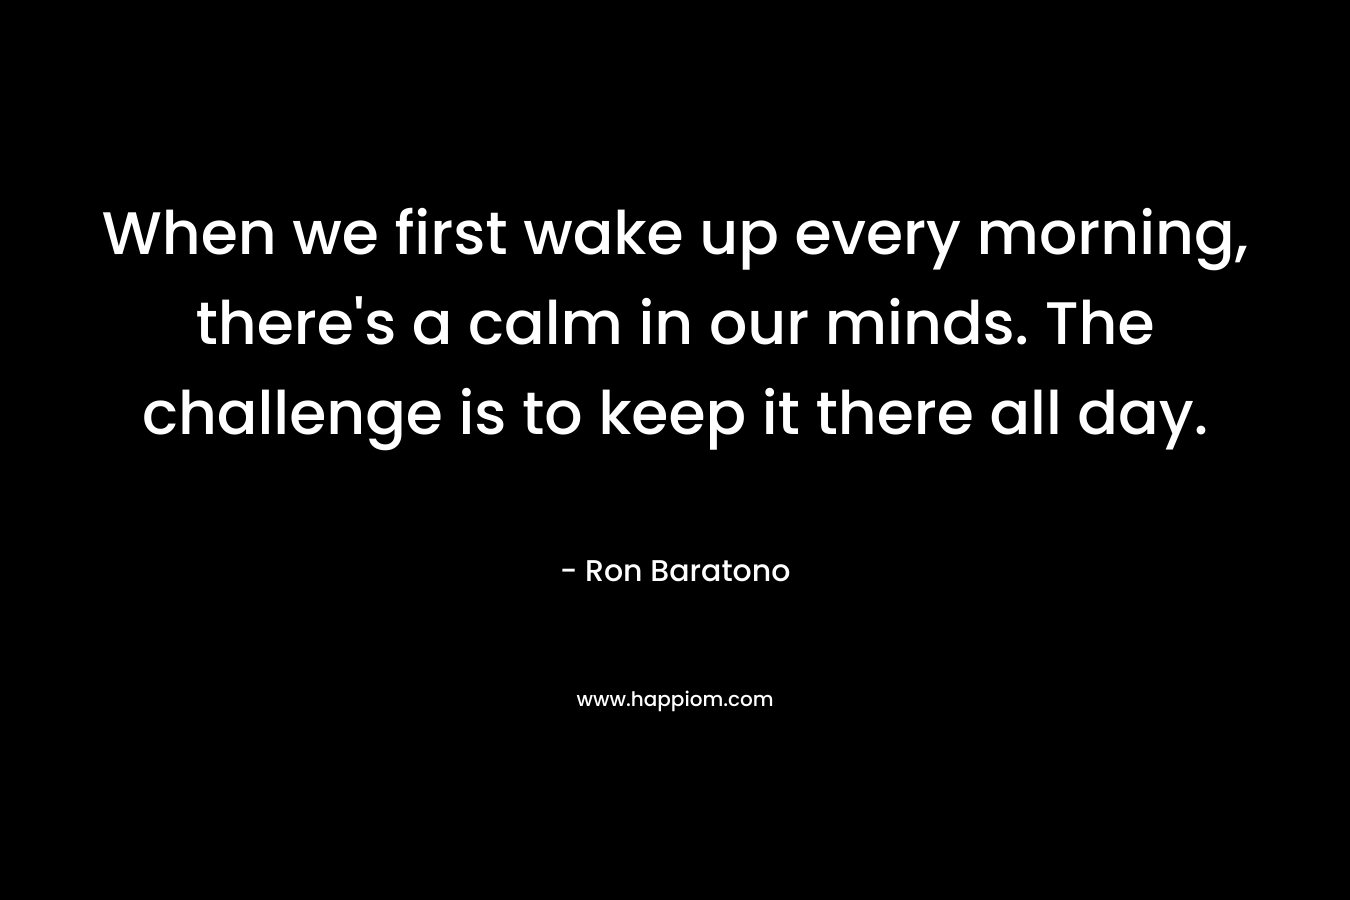 When we first wake up every morning, there’s a calm in our minds. The challenge is to keep it there all day. – Ron Baratono